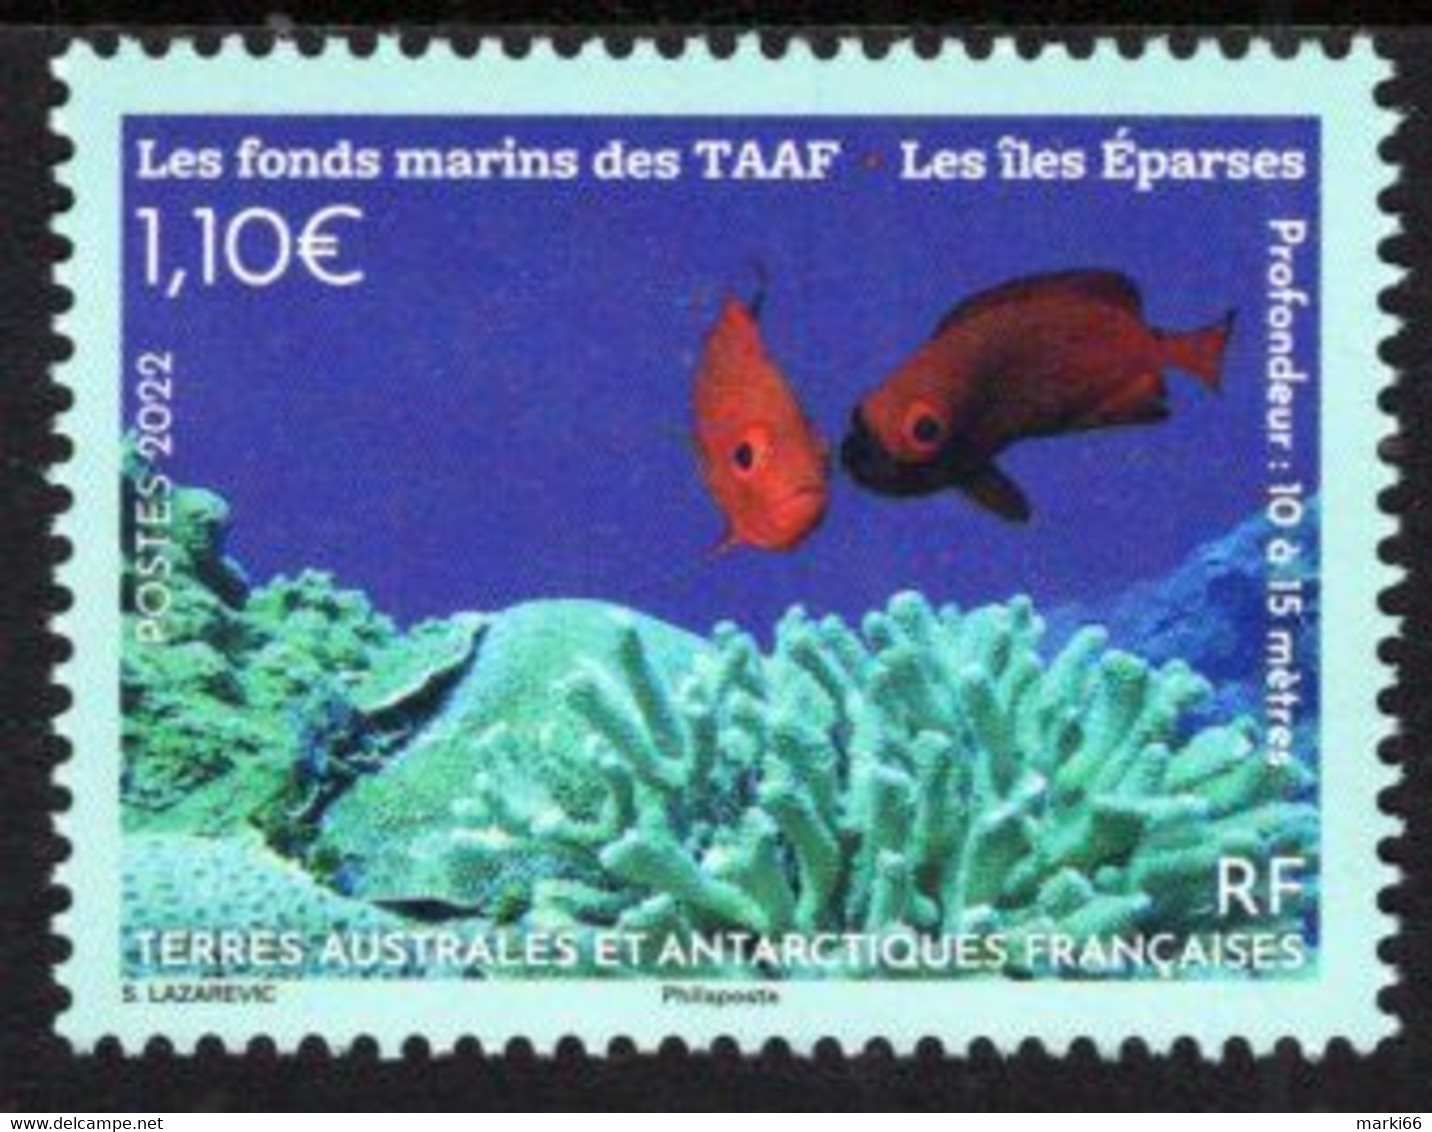 TAAF - 2022 - Seabeds Of The FSAT - Fish And Corals Of Scattered Islands- Mint Stamp - Nuevos